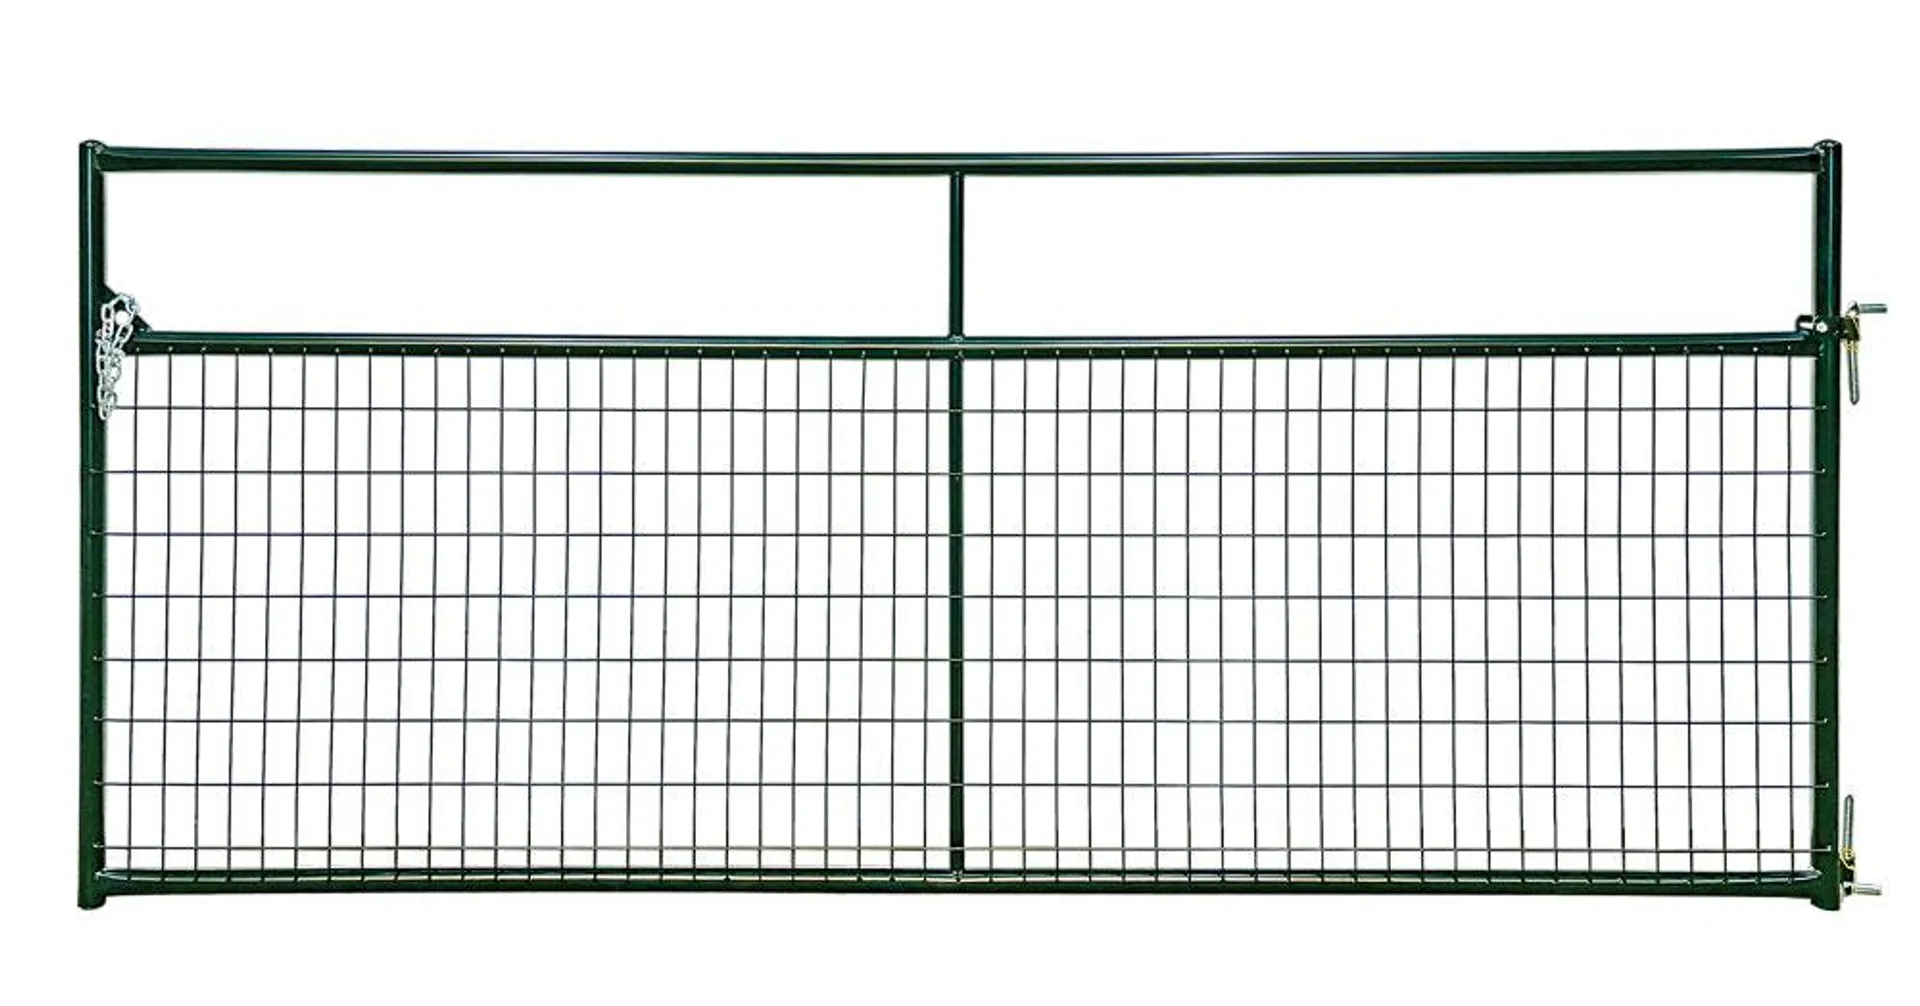 RWG12GN Wire-Filled Economy Gate, 12 ft W Gate, 50-1/2 in H Gate, 20 ga Frame Tube/Channel, 8 ga Mesh Wire